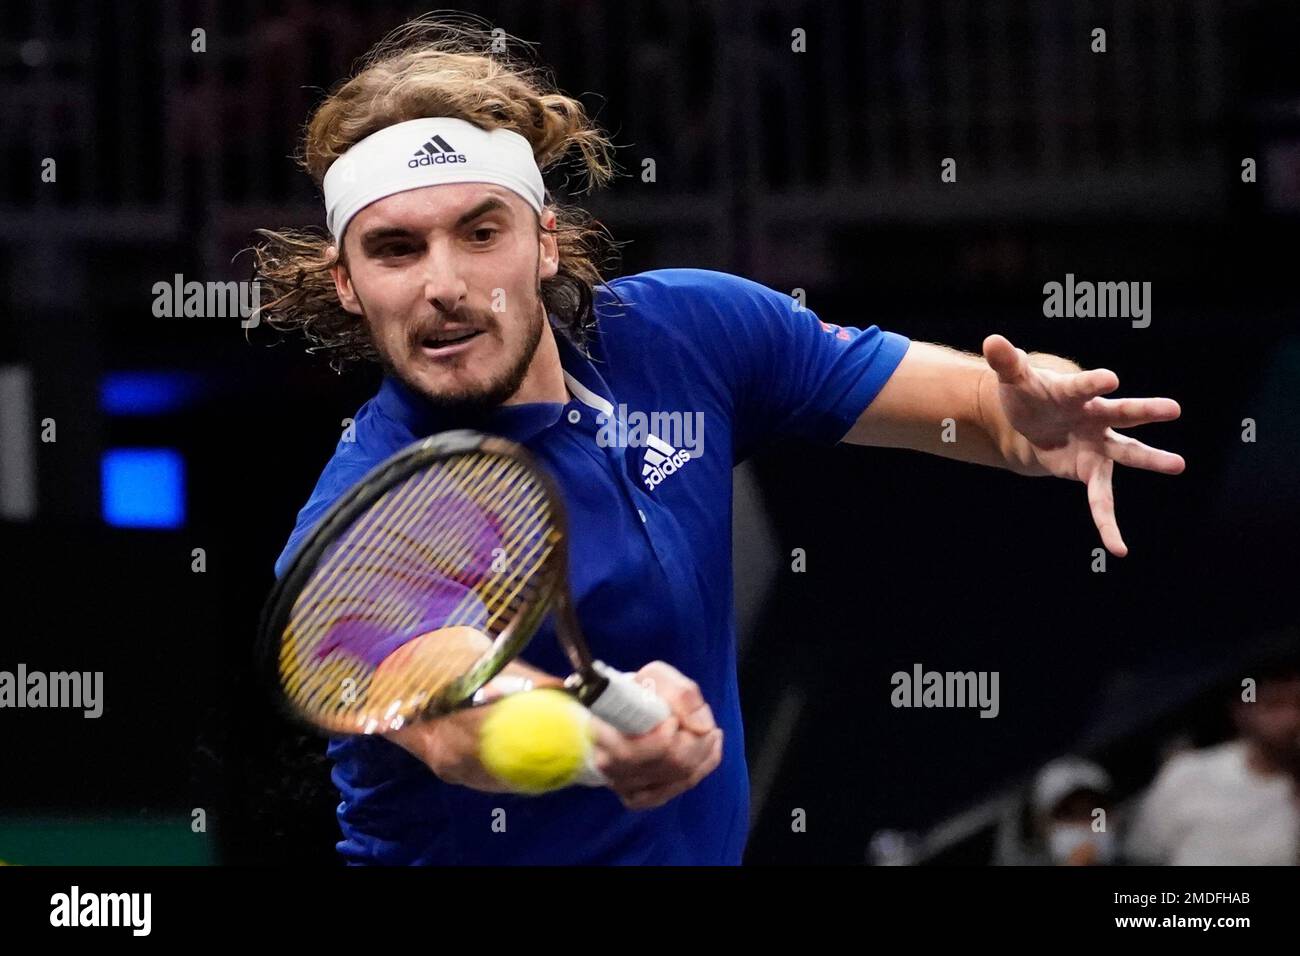 Team Europes Stefanos Tsitsipas, of Greece, returns the ball to Team Worlds Nick Kyrgios, of Australia, during Laver Cup tennis, Saturday, Sept